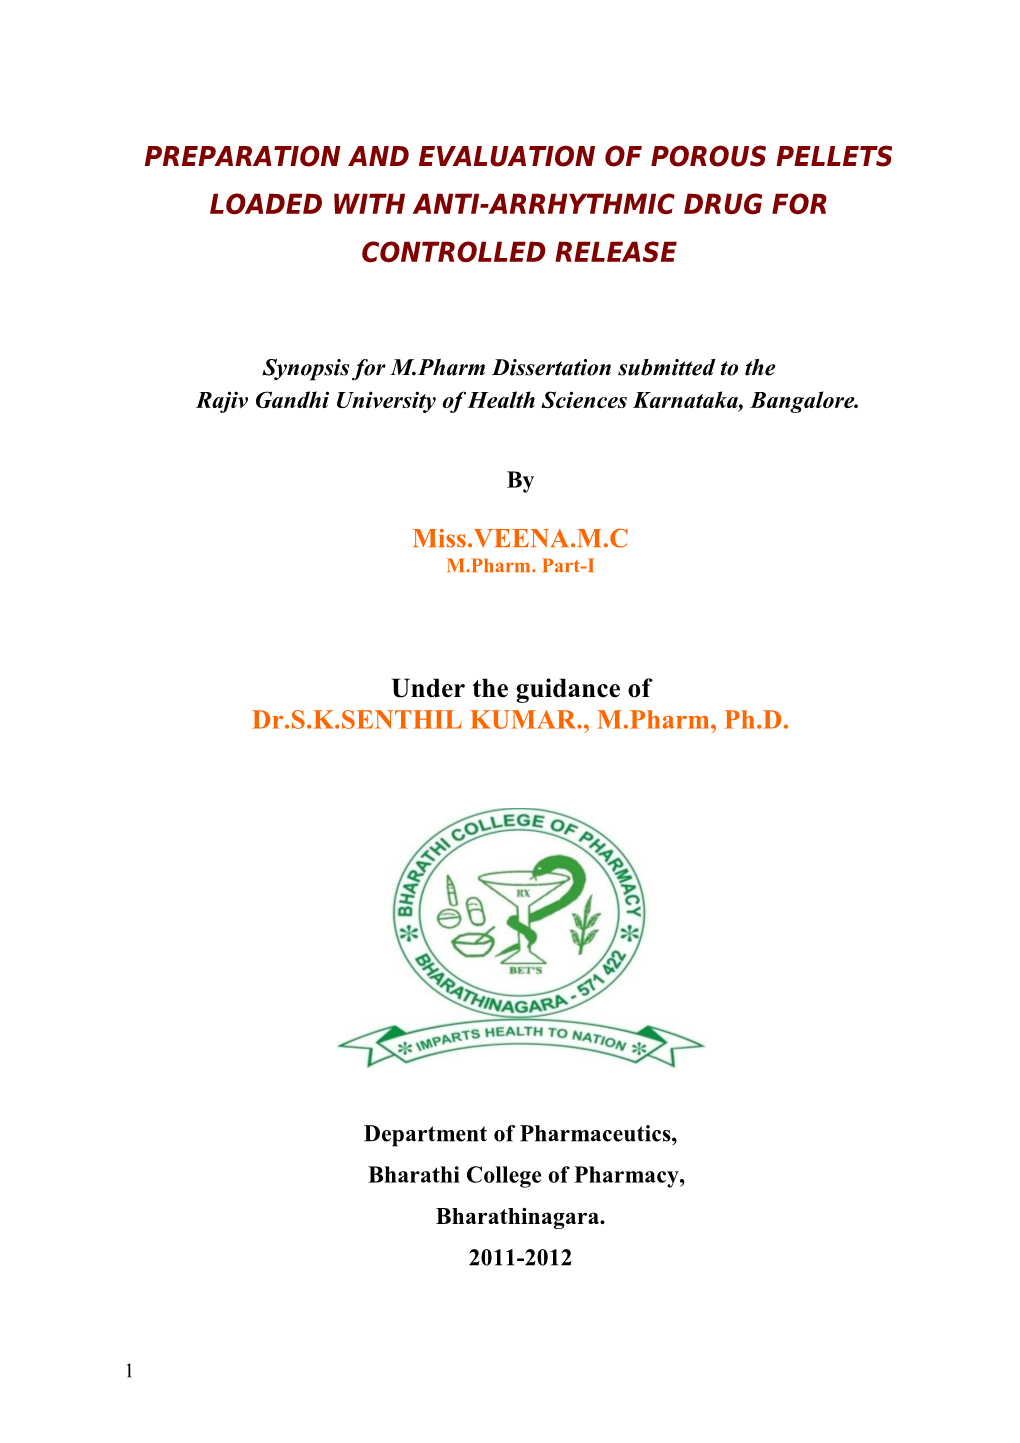 Synopsis for M.Pharm Dissertation Submitted to The